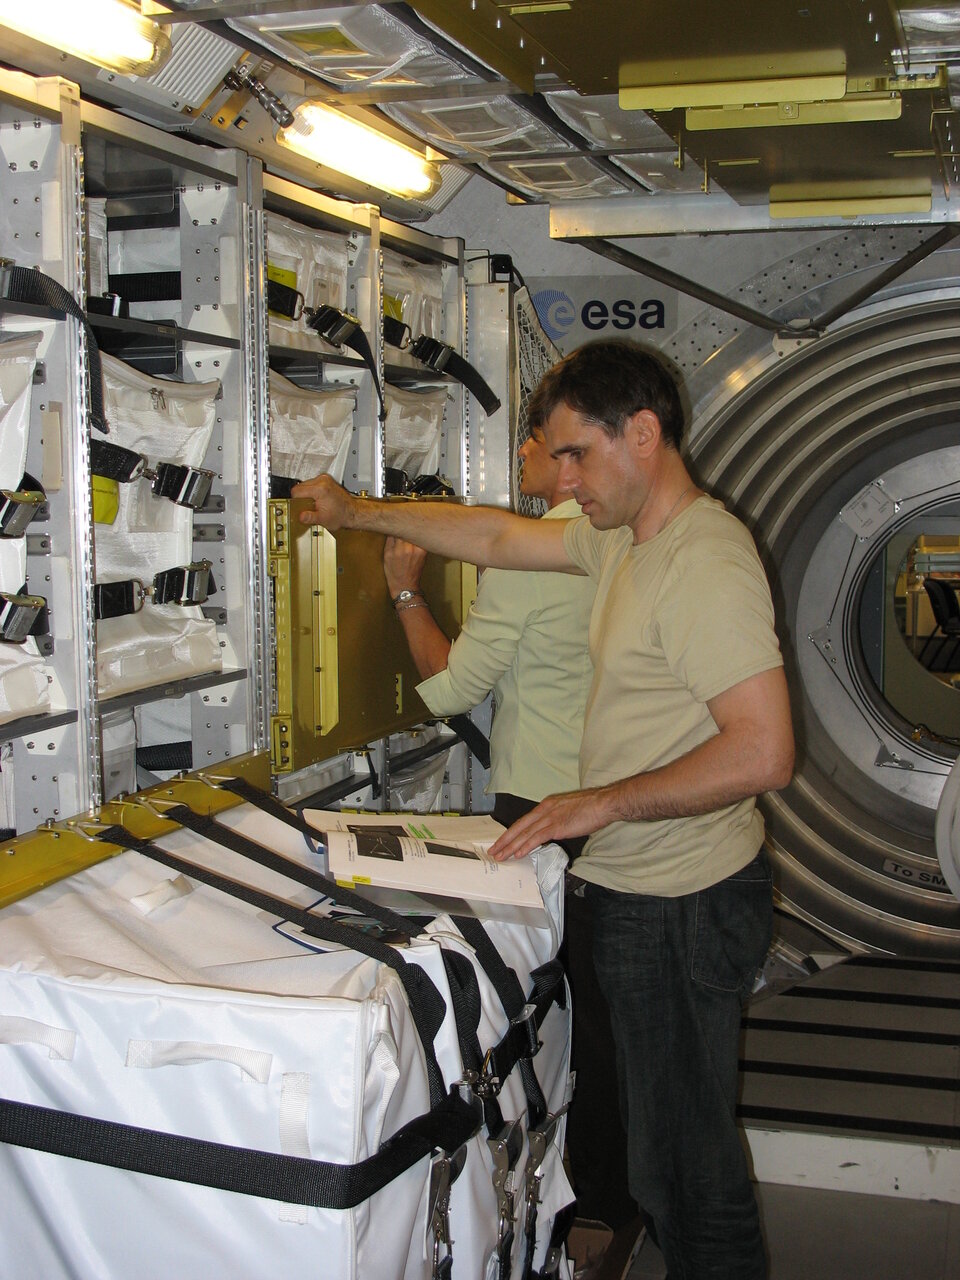 Expedition 16 crew trained for hatch opening and ingress at EAC